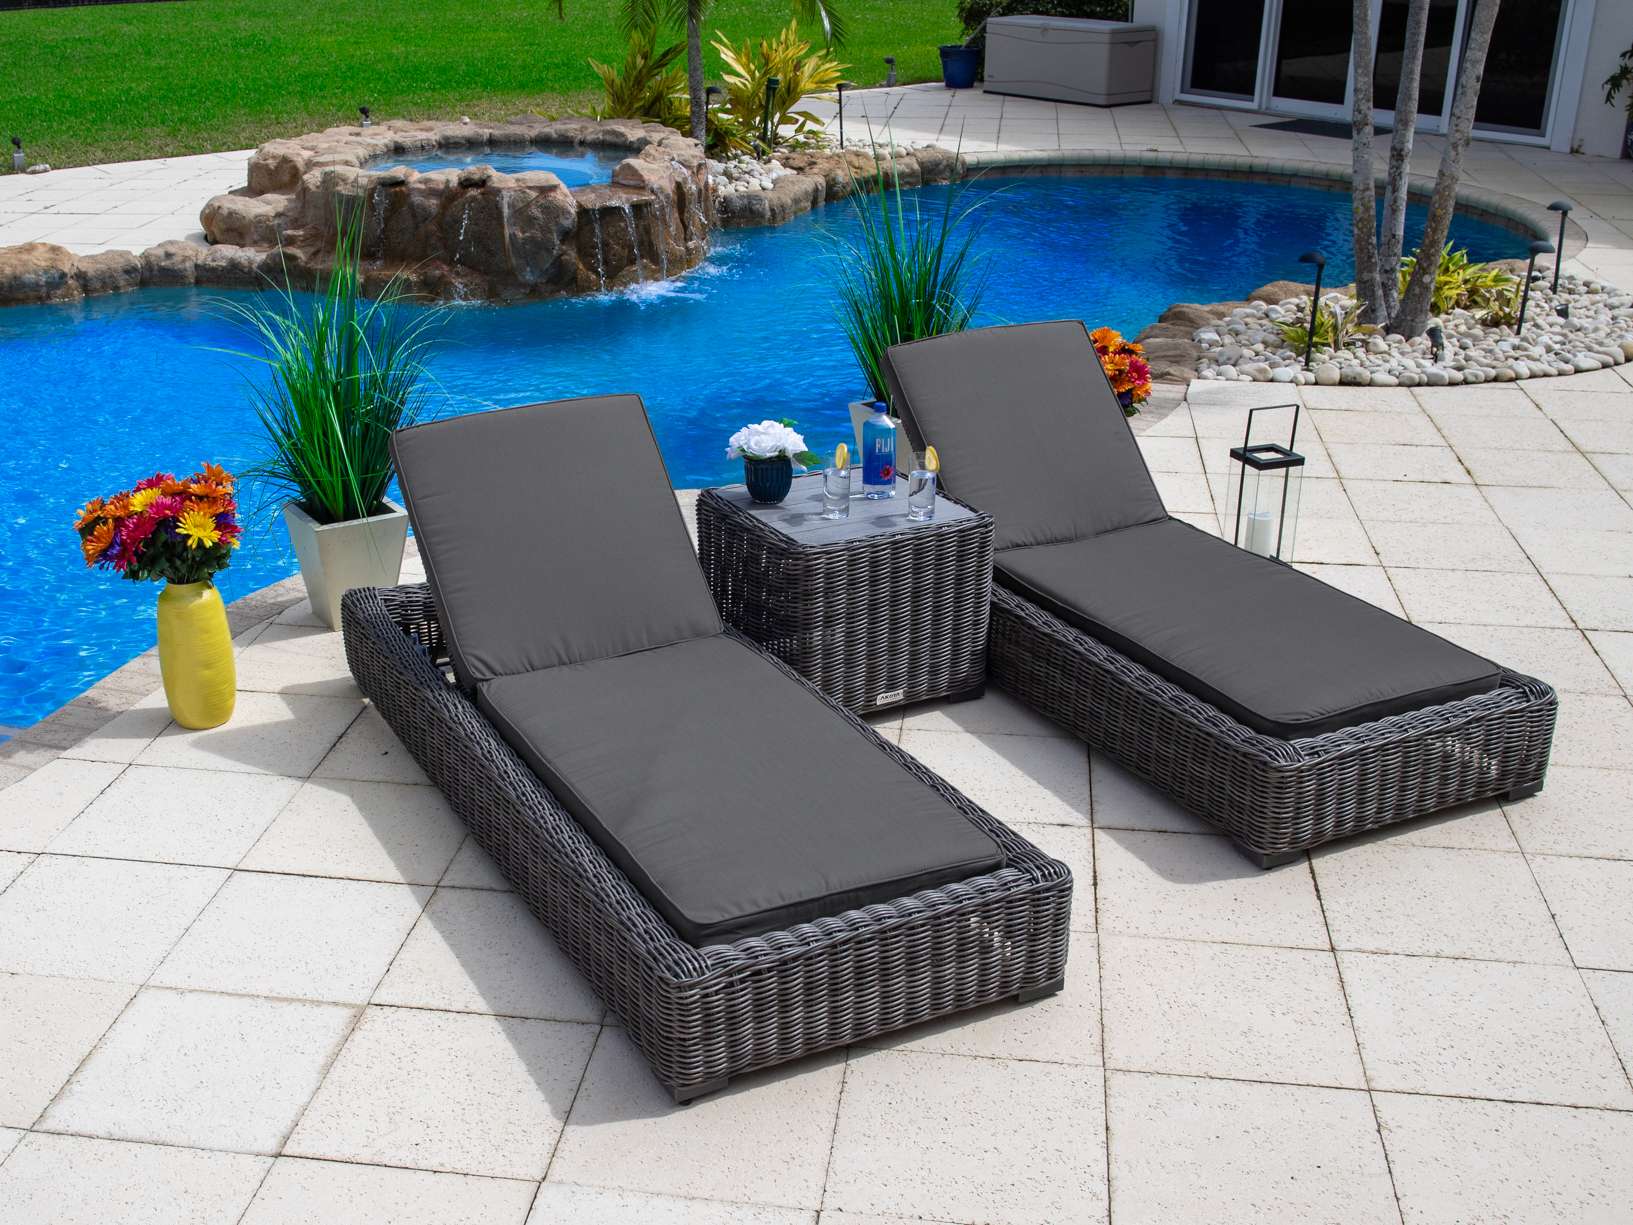 Malmo 3-Piece Resin Wicker Outdoor Patio Furniture Set Two Chaise Lounge Chairs and Side Table (Full-Round Gray Wicker, Sunbrella Canvas Charcoal) - image 1 of 1